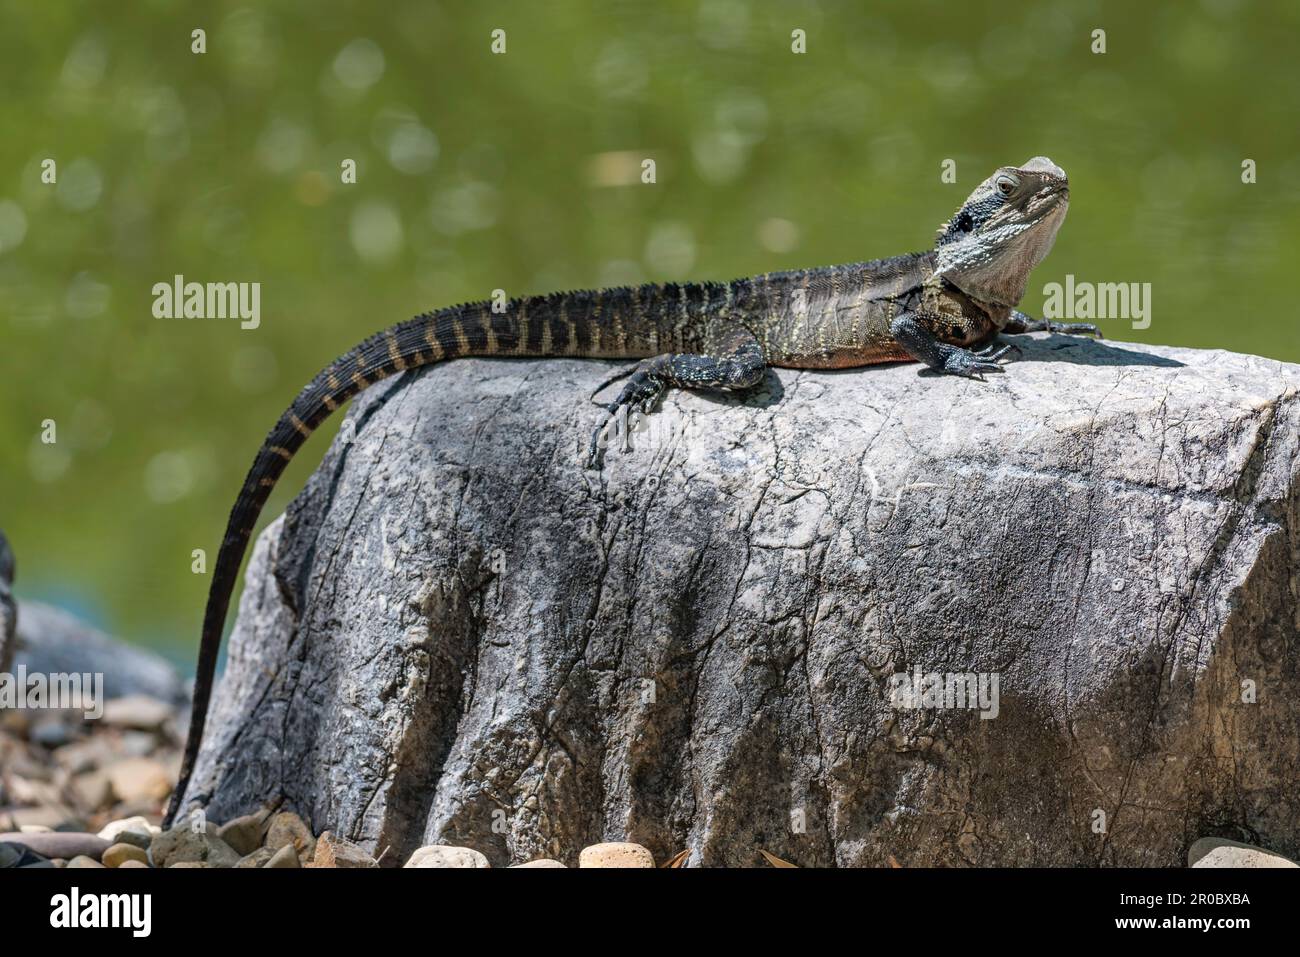 An Eastern Water Dragon, (Physignathus lesueurii lesueuriii) basking in the Summer sun at the Chinese Gardens of Friendship in Sydney, Australia Stock Photo